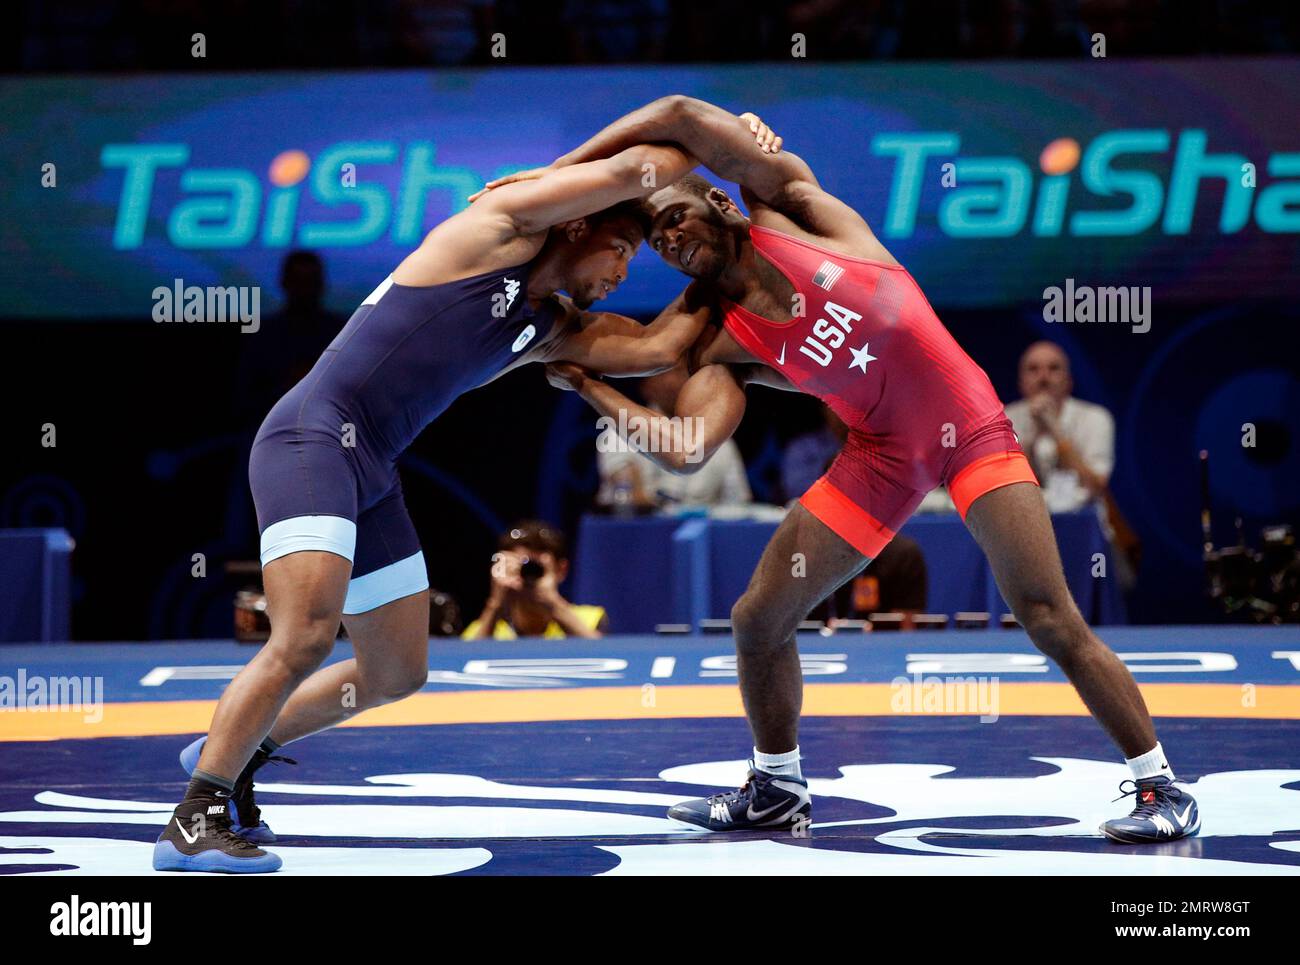 United States' James Malcom Green, right, and Frank Chamizo Marquez of  Italy compete in the men's free style 70 kg category during the final of  the Wrestling World Cup at the Paris